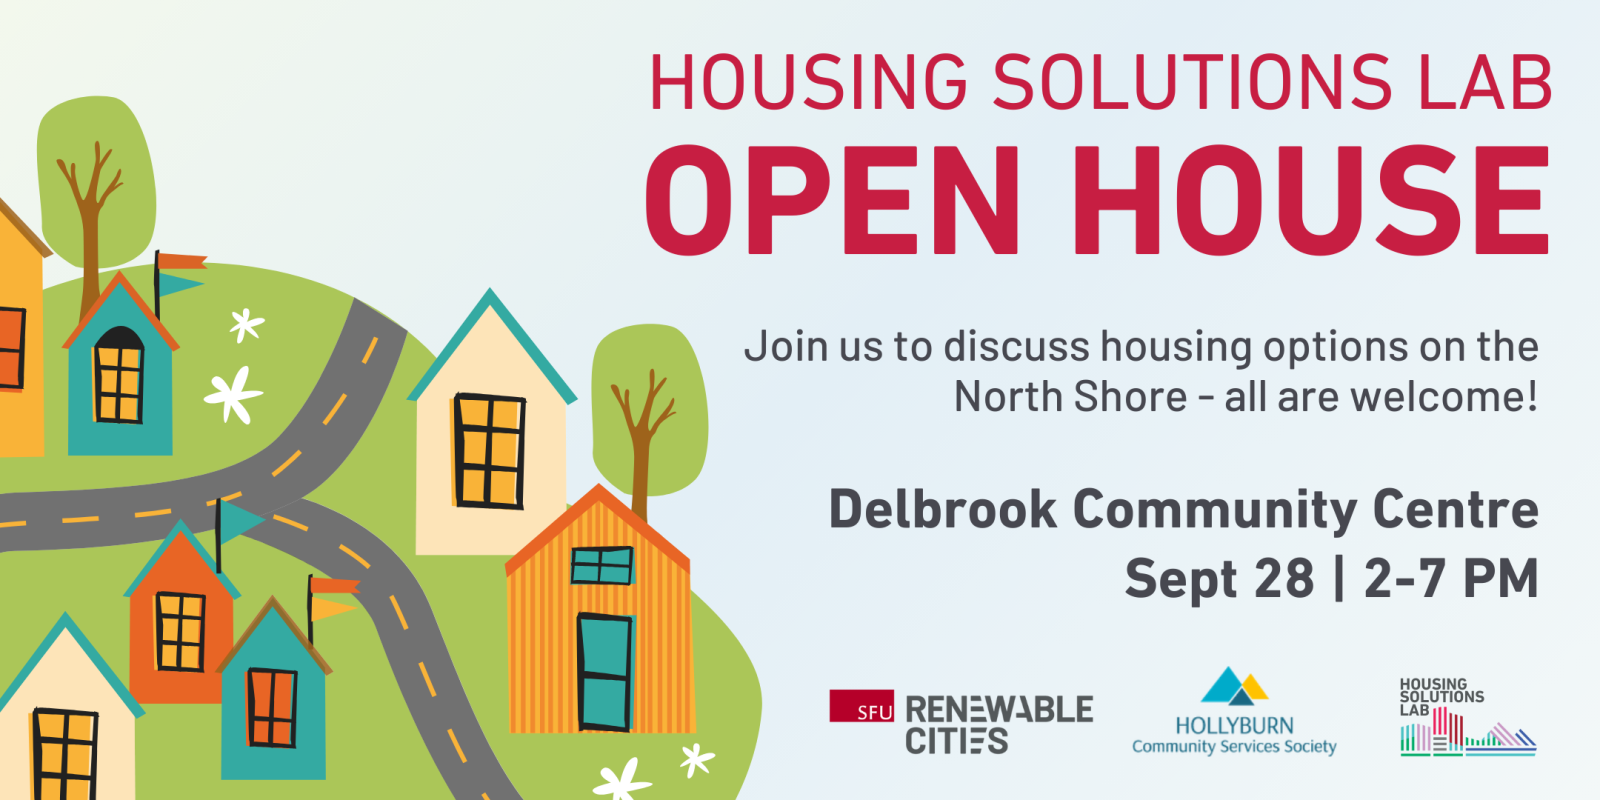 Housing Solutions Lab Open House on Sept 28 from 2-7PM at the Delbrook Community Centre. Join us to discuss housing options on the North Shore. All are welcome!